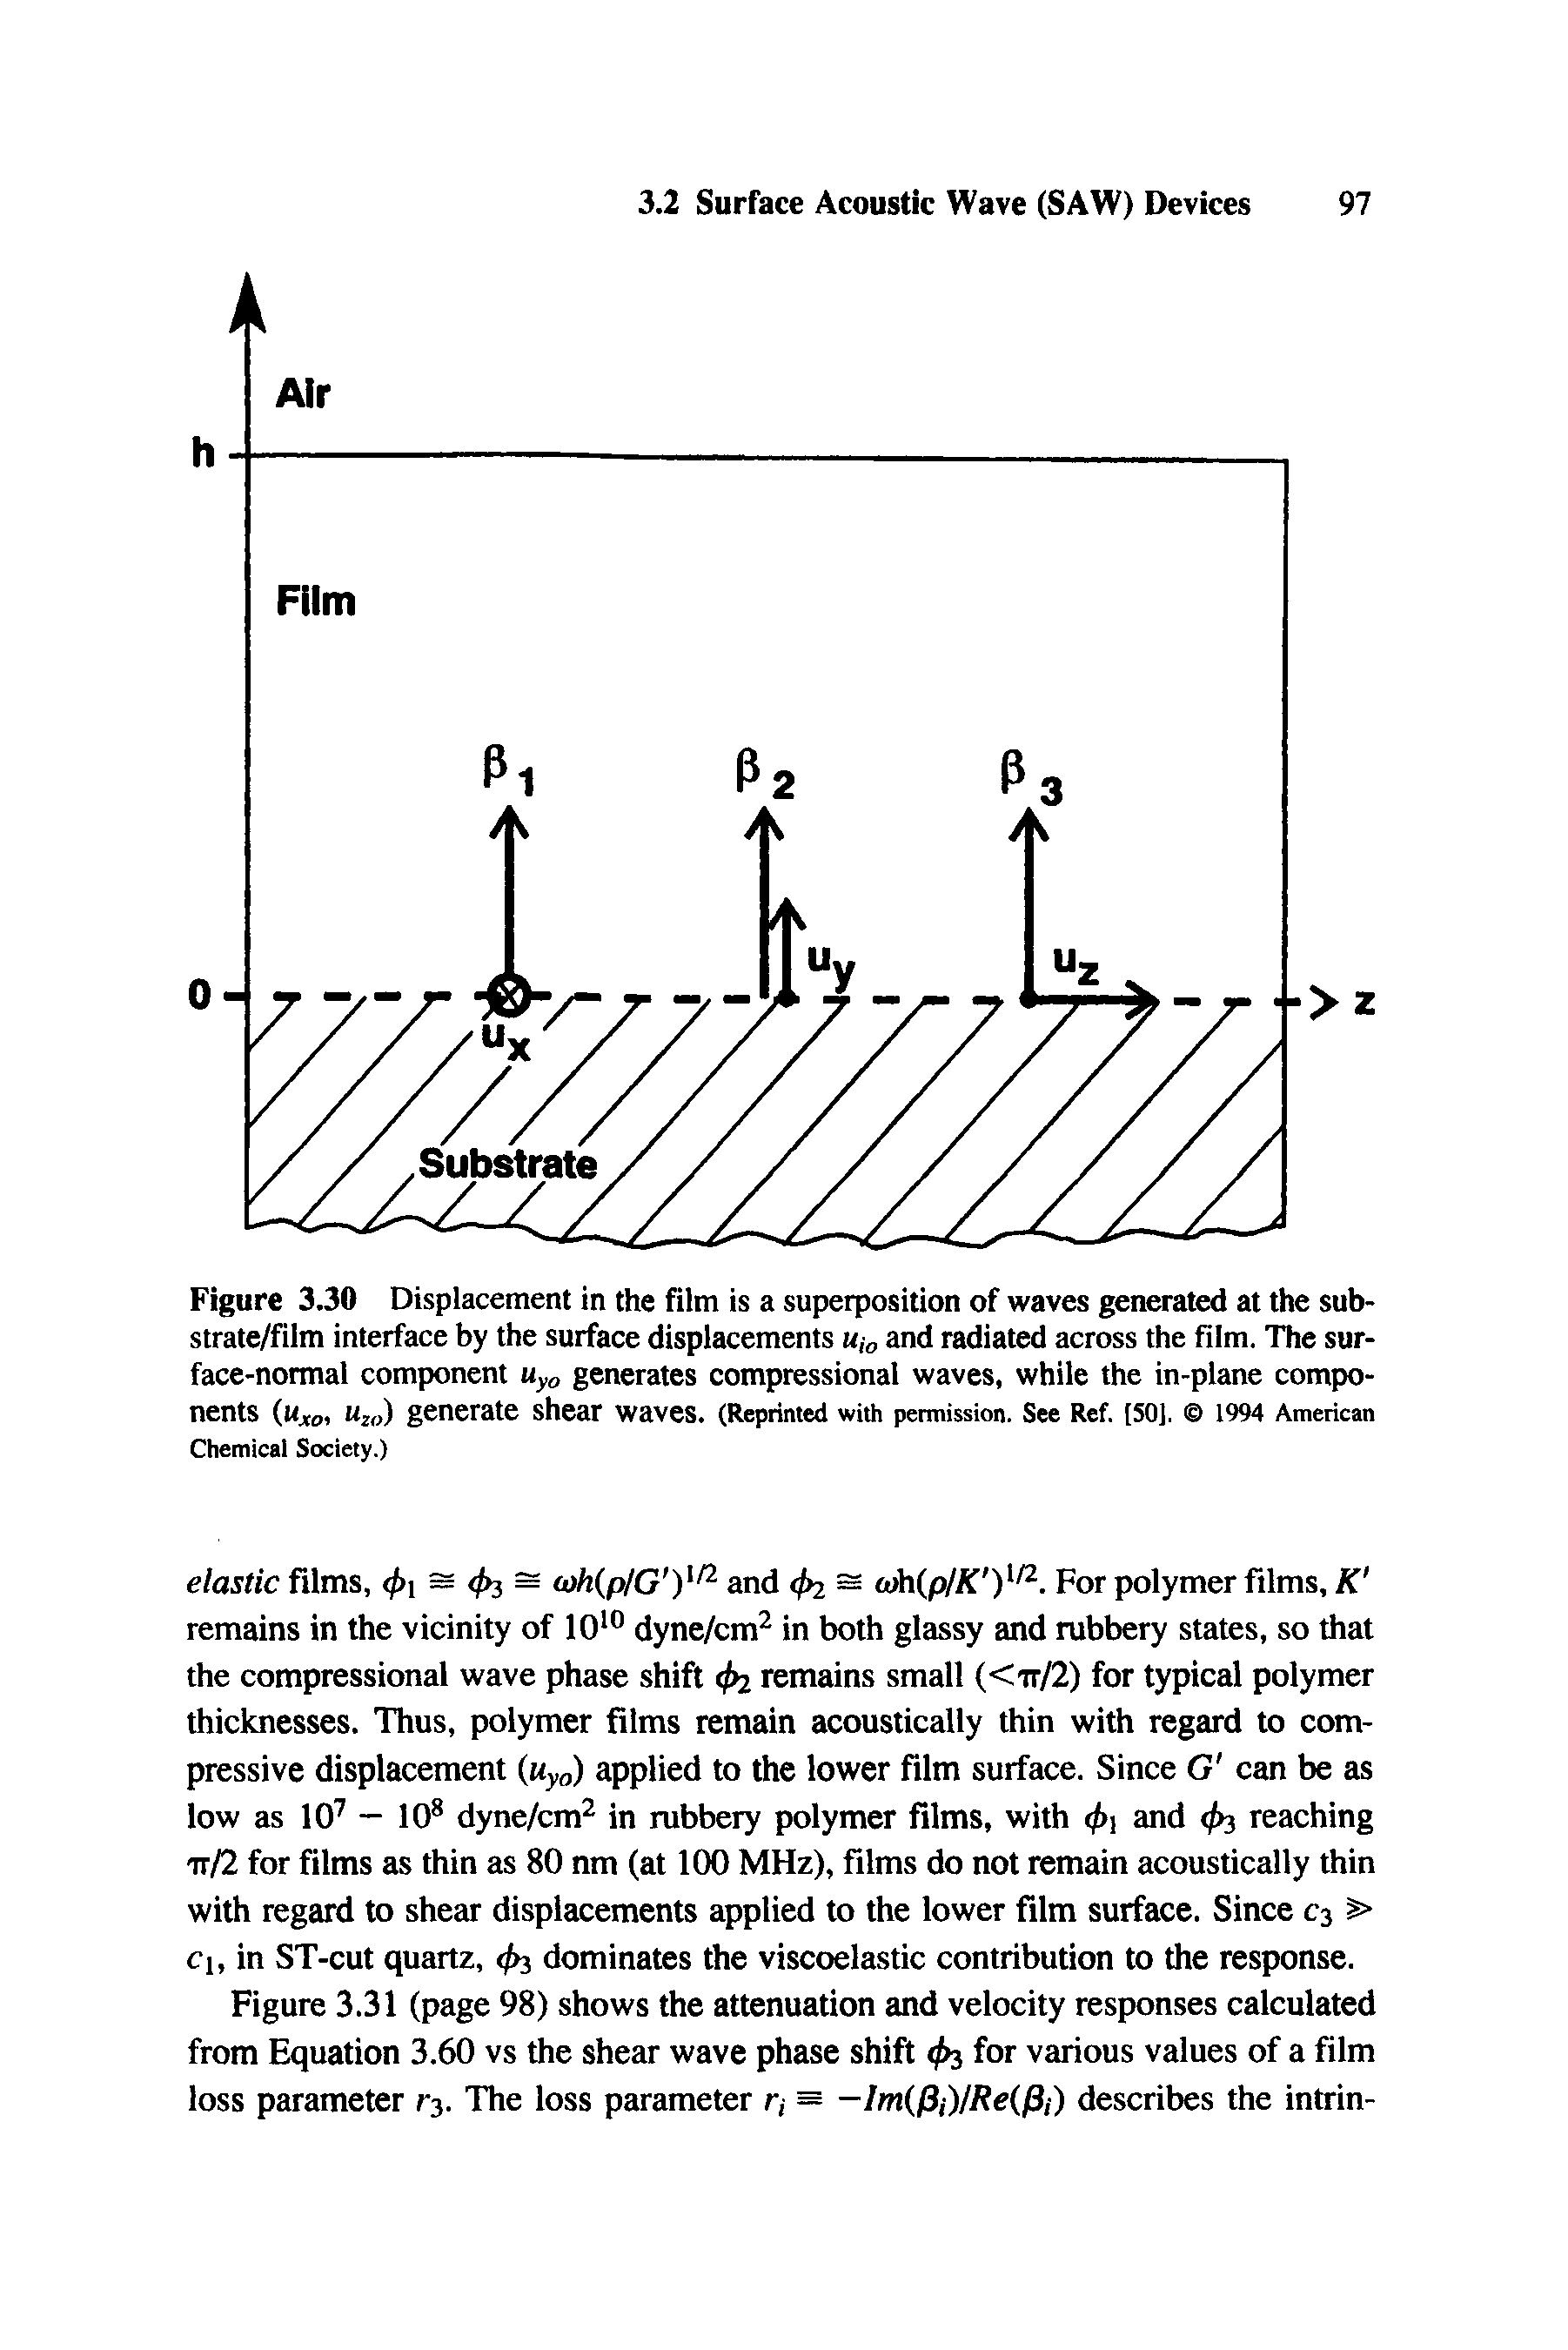 Figure 3.30 Displacement in the film is a superposition of waves generated at the sub-strate/fllm interface by the surface displacements m,v, and radiated across the film. The surface-normal component Uyo generates compressional waves, while the in-plane components (Ujto, U20) generate shear waves. (Reprinted with permission. See Ref. [501. 1994 American Chemical Society.)...